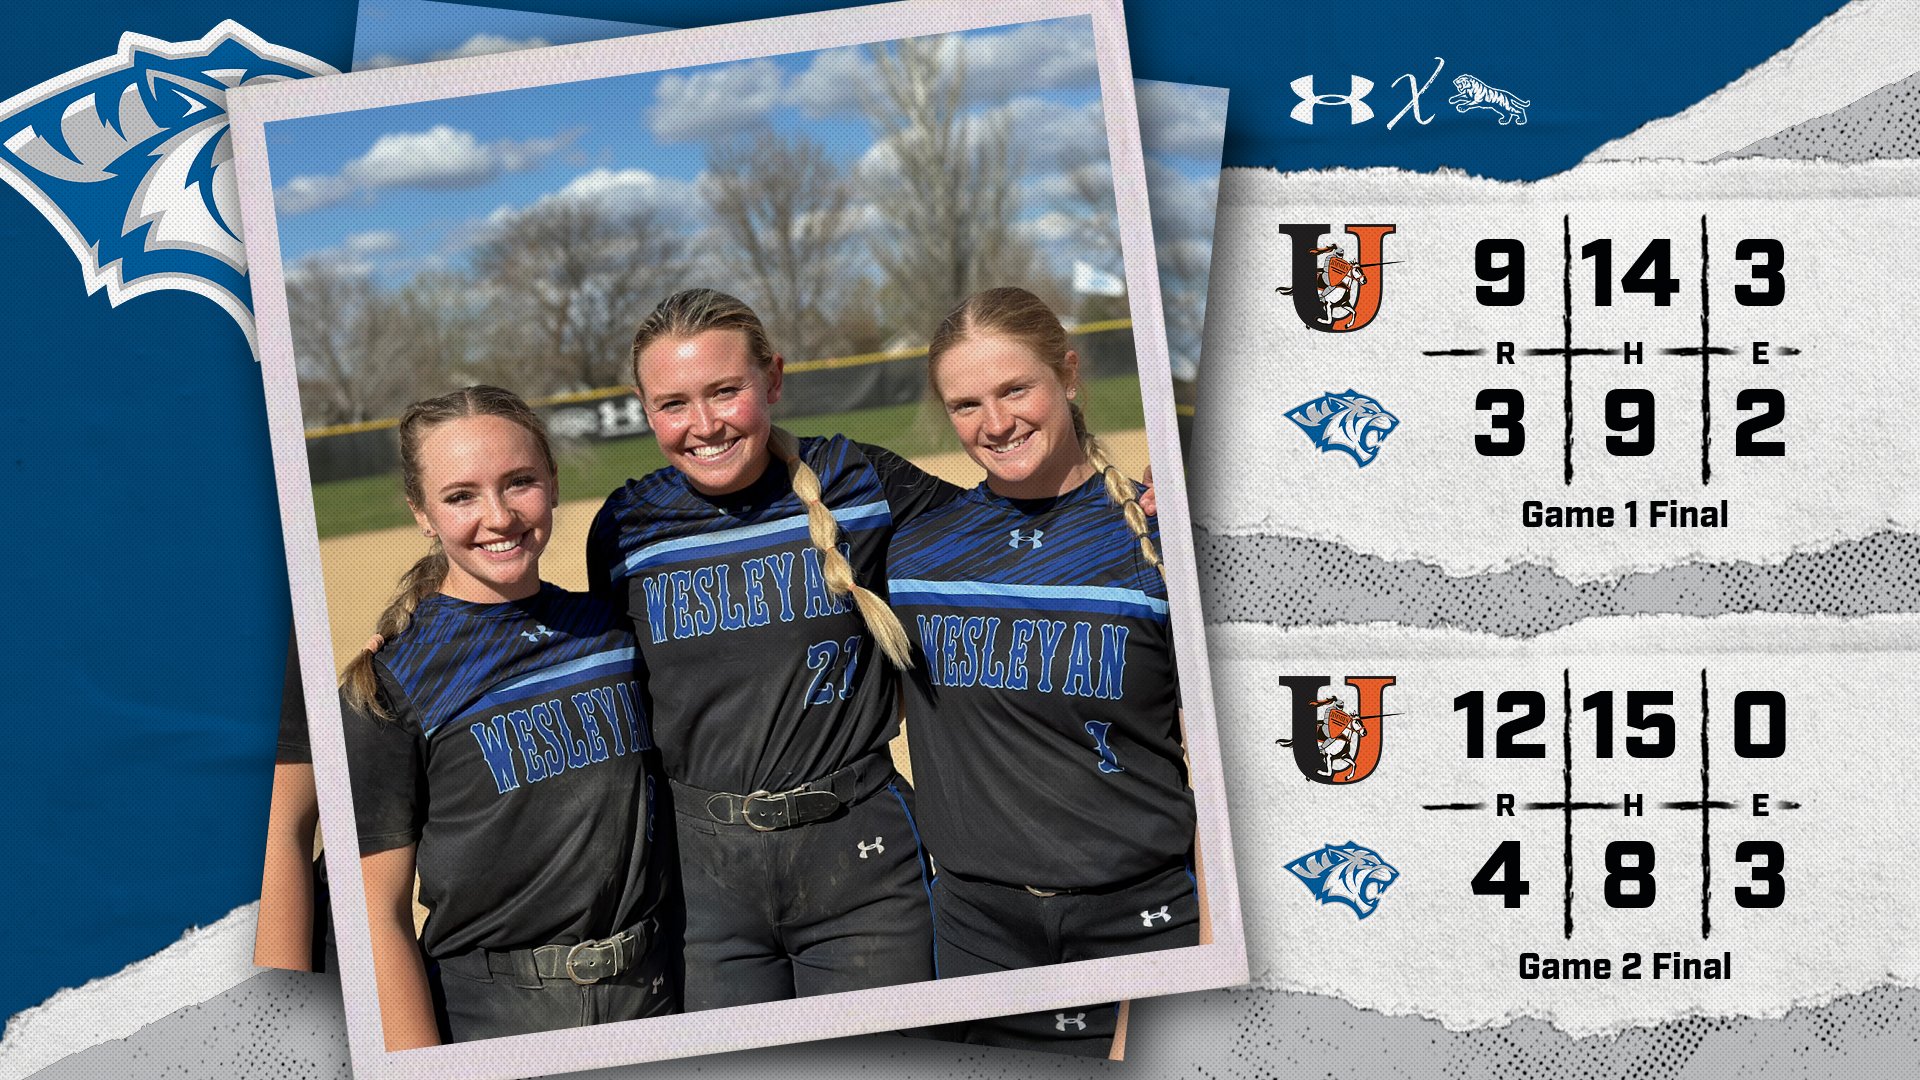 DWU SOFTBALL HONORS THREE ACTIVE RECORD HOLDERS IN LAST HOME CONFERENCE GAME